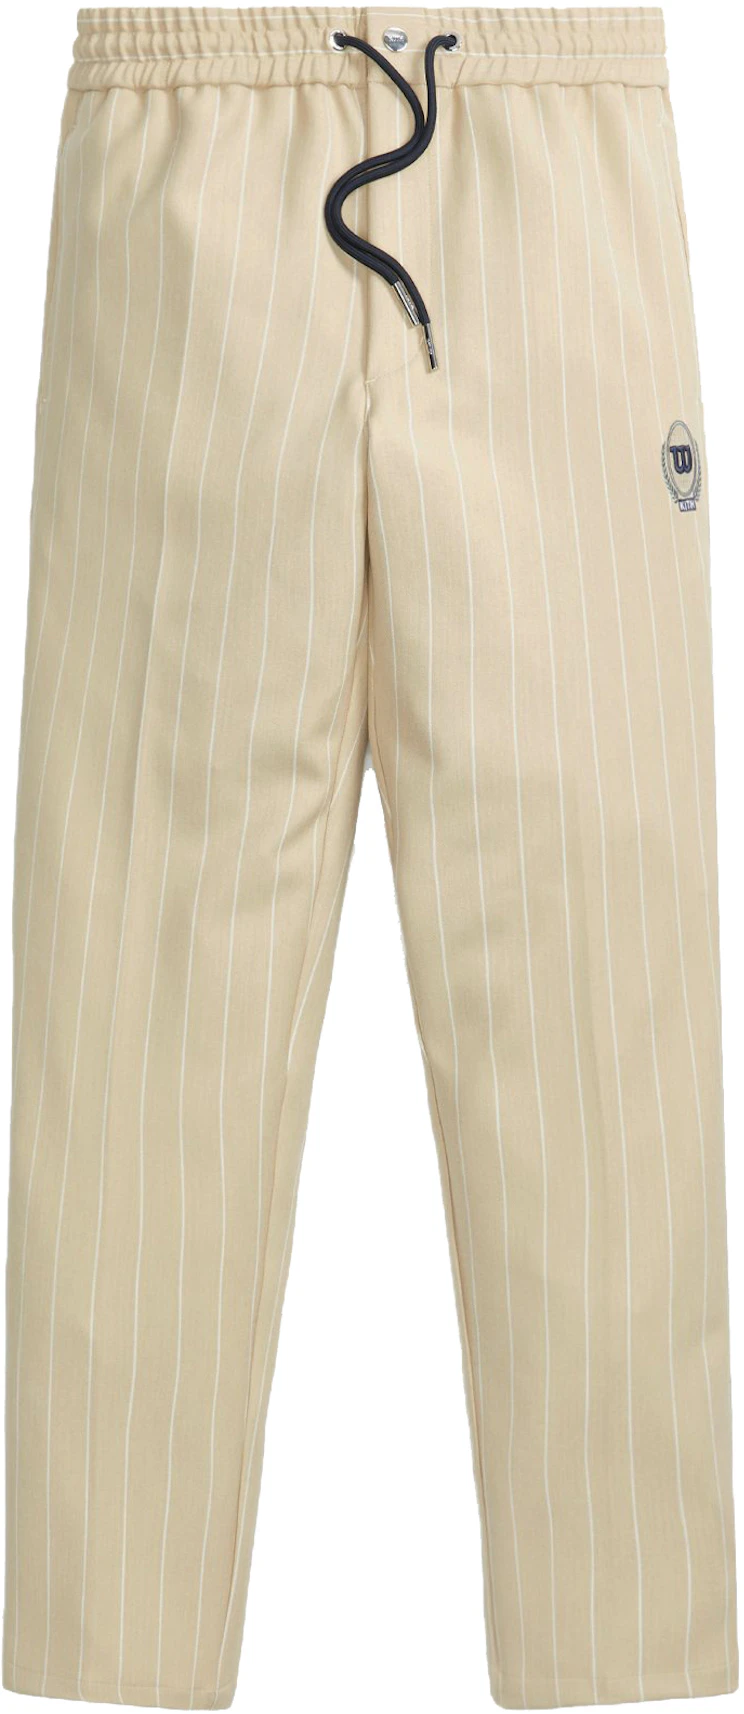 Kith x Wilson Pinstripe Double Knit Chatham Pant Canvas - FW21 - MX